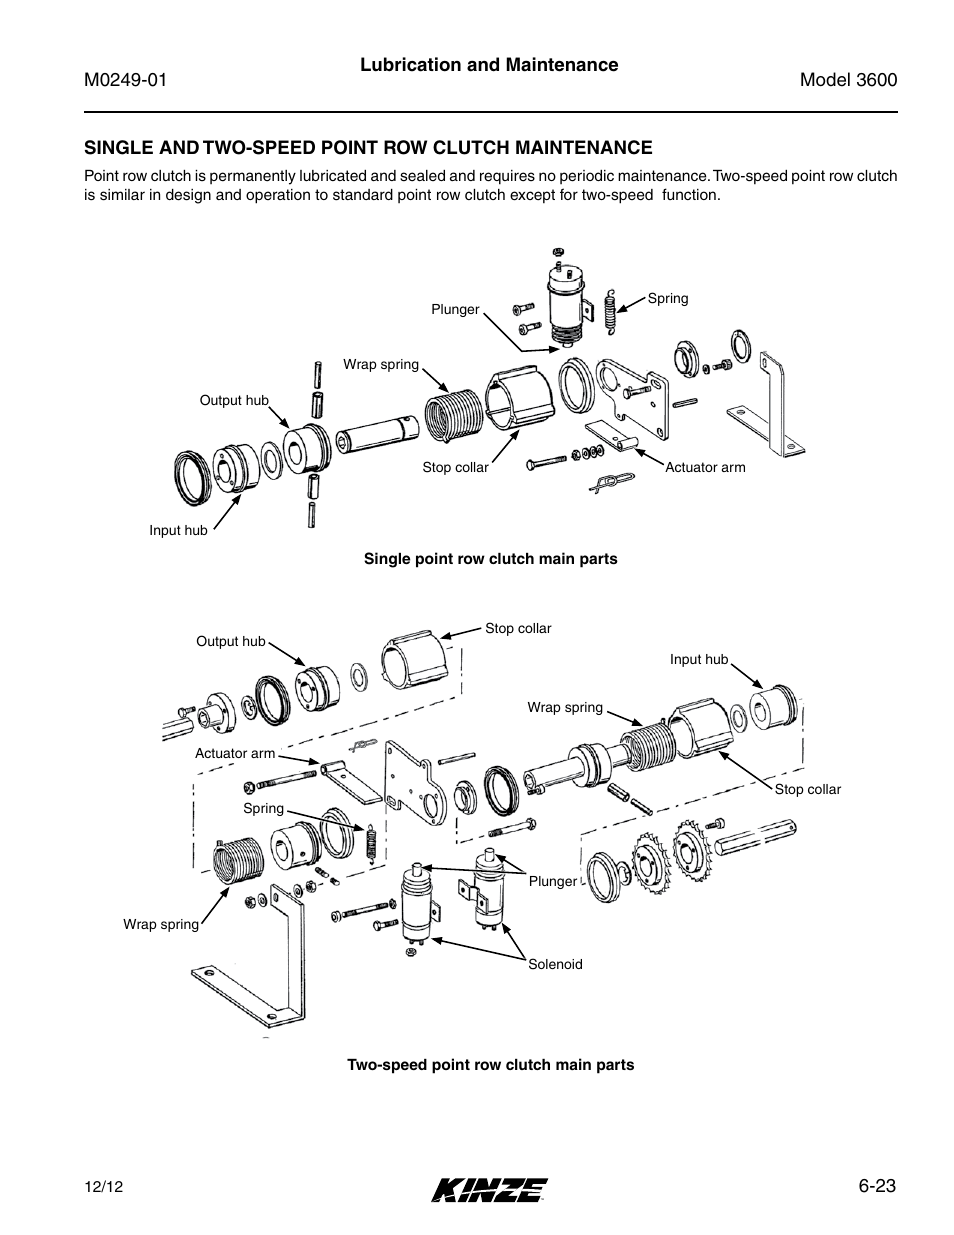 Single and two-speed point row clutch maintenance | Kinze 3600 Lift and Rotate Planter (70 CM) Rev. 5/14 User Manual | Page 127 / 158